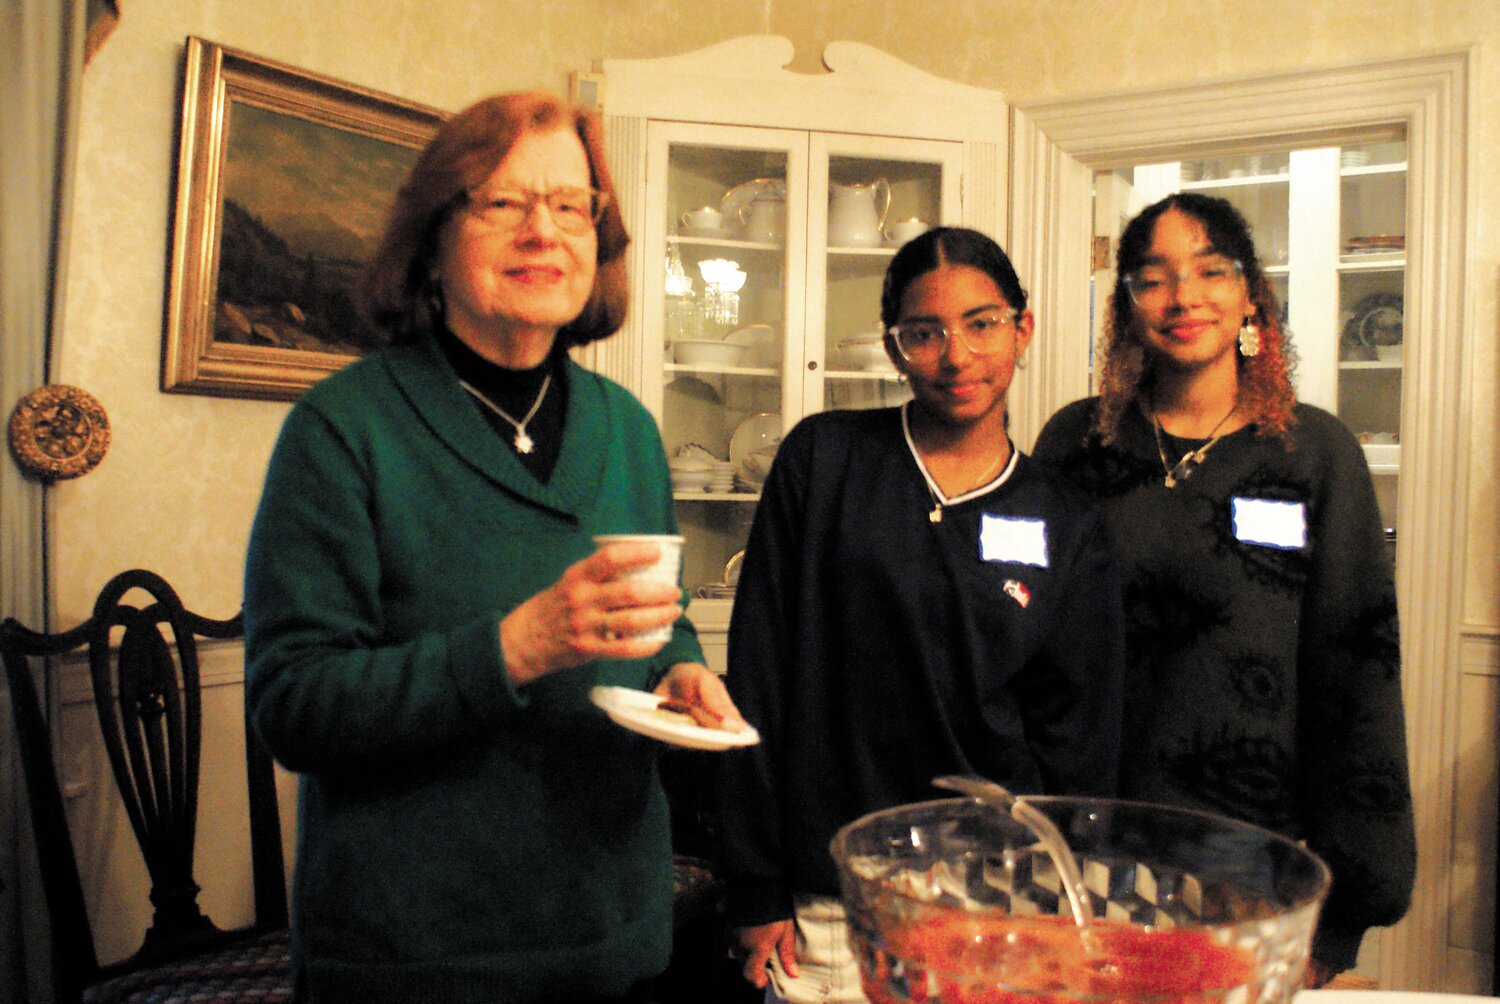 SHARING SOME PUNCH: President of the Cranston Historical Society Sandra Moyer taking a moment to rest with sister volunteers from Cranston East Willy and Wilmary Hunt.